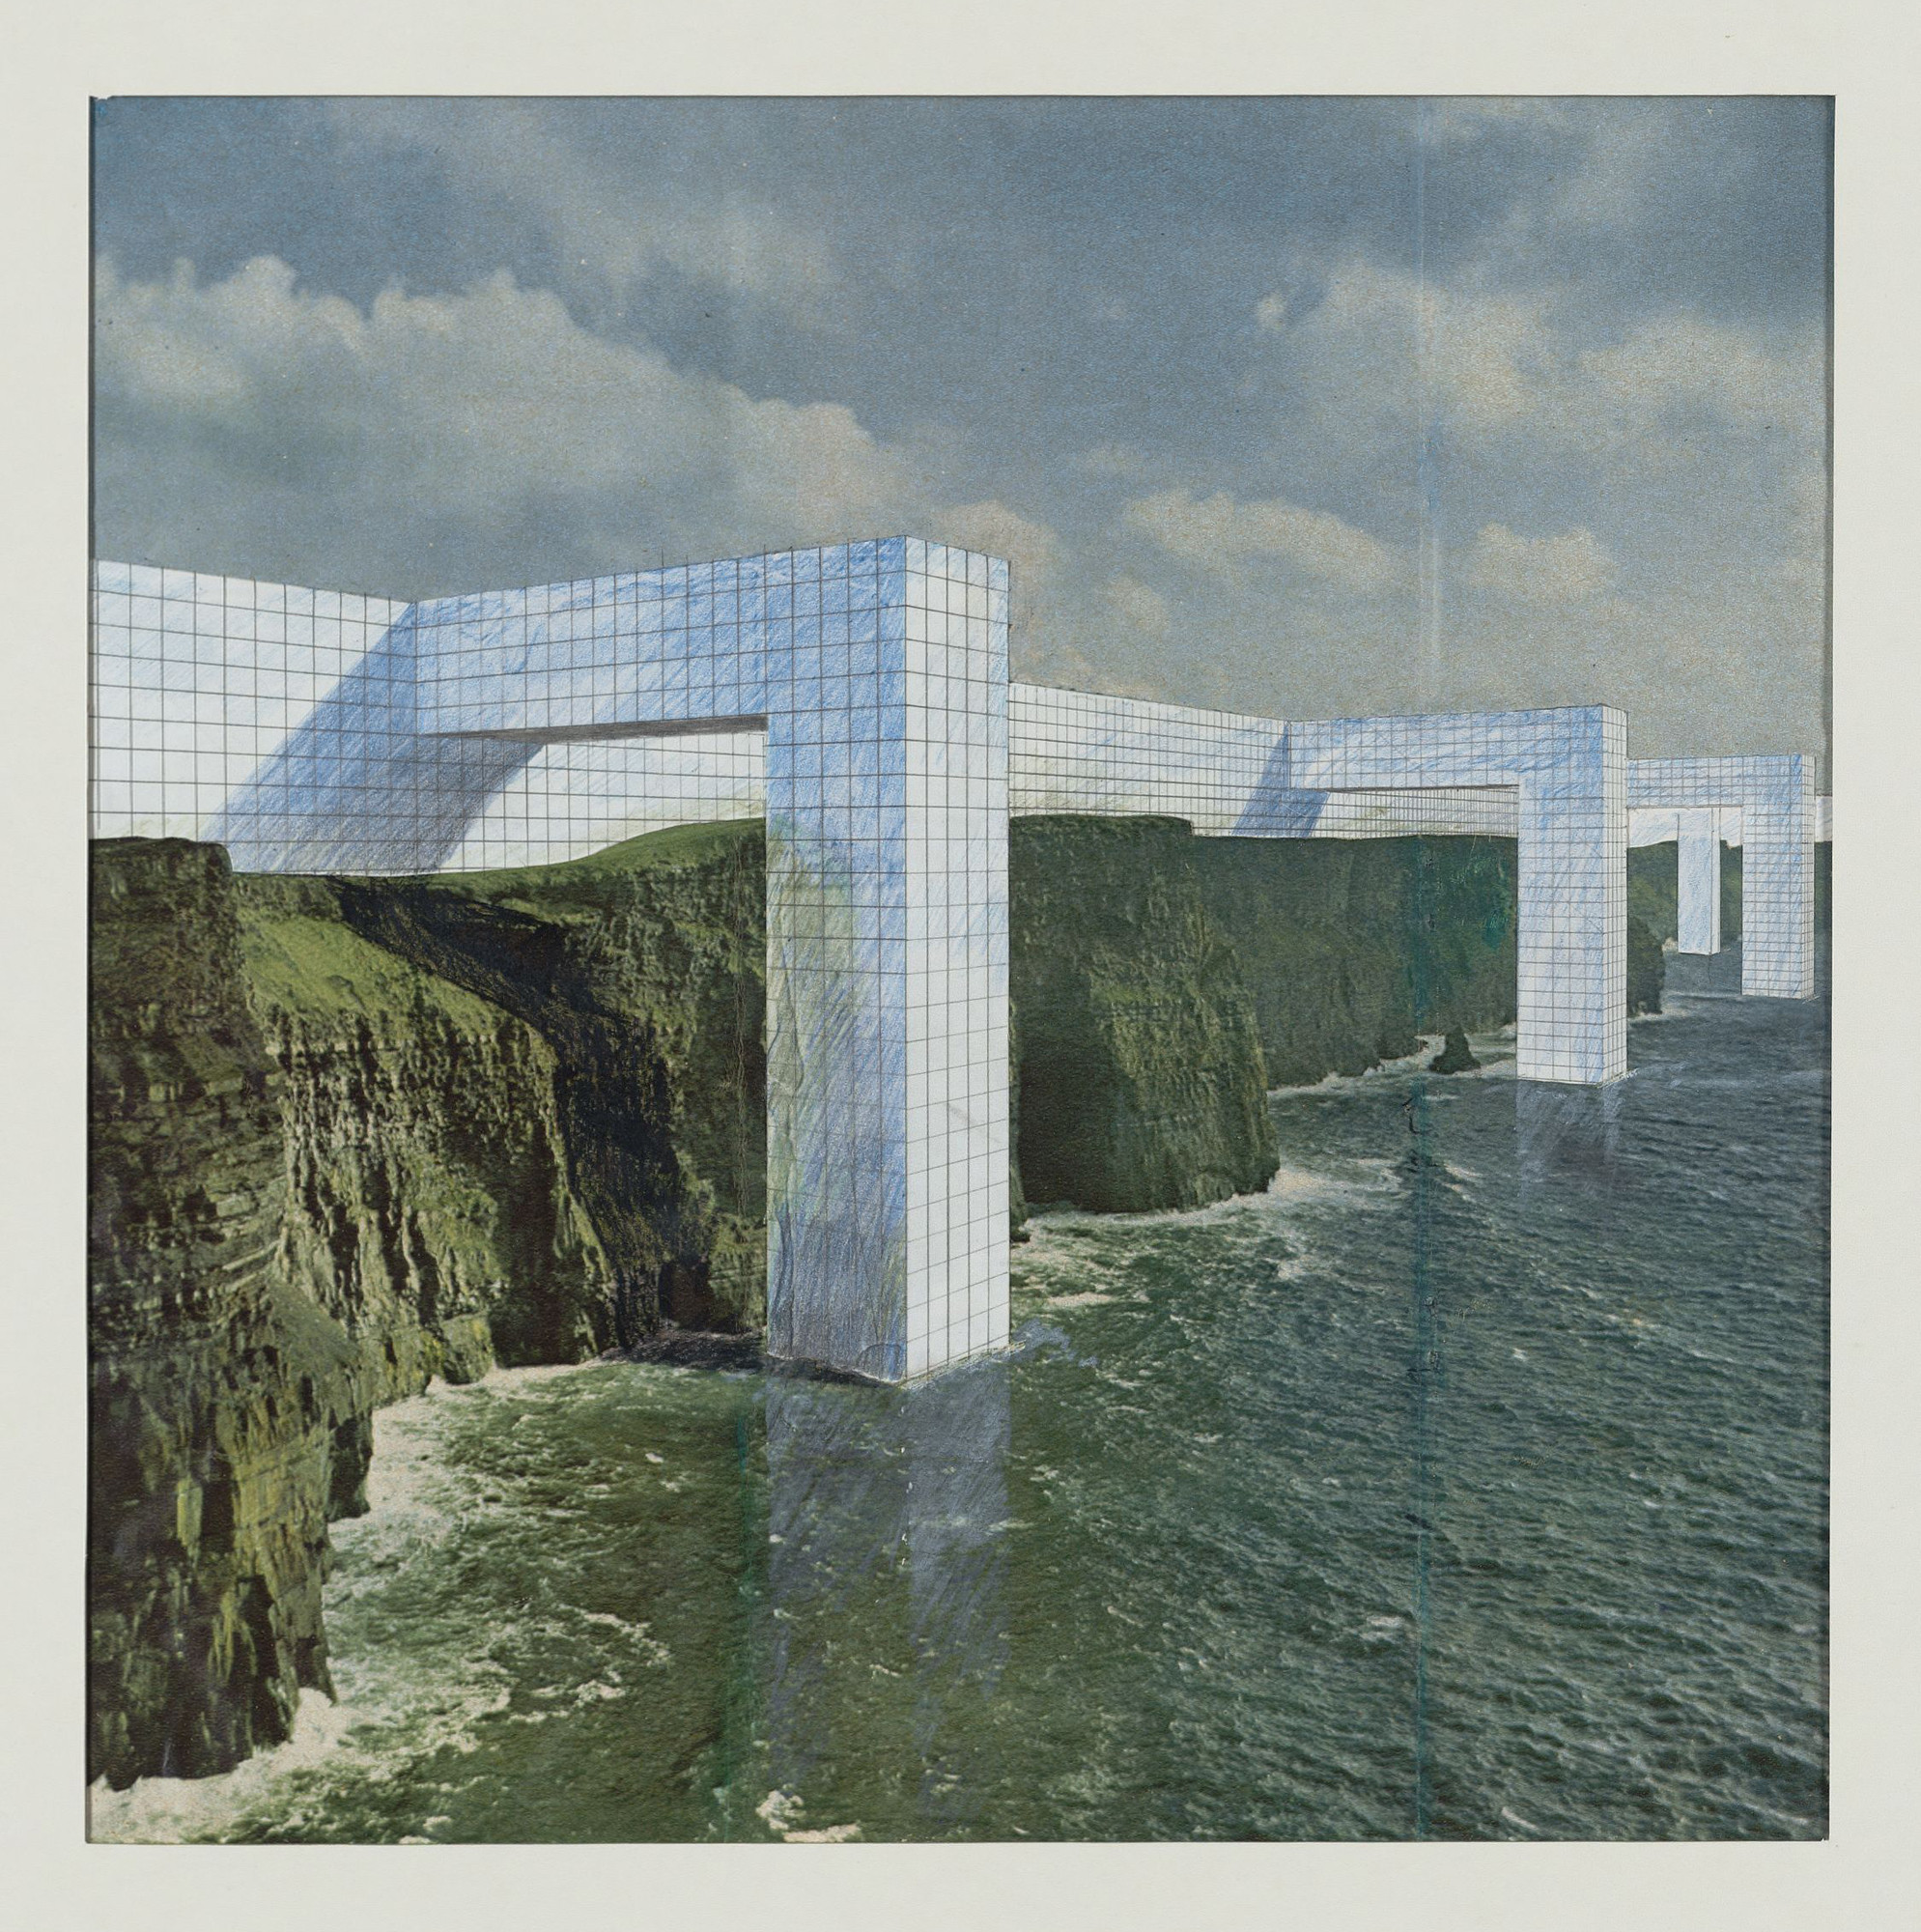 fig. 2: Superstudio&nbsp;— The Continuous Monument: On the Rocky Coast, project (Perspective), 1969